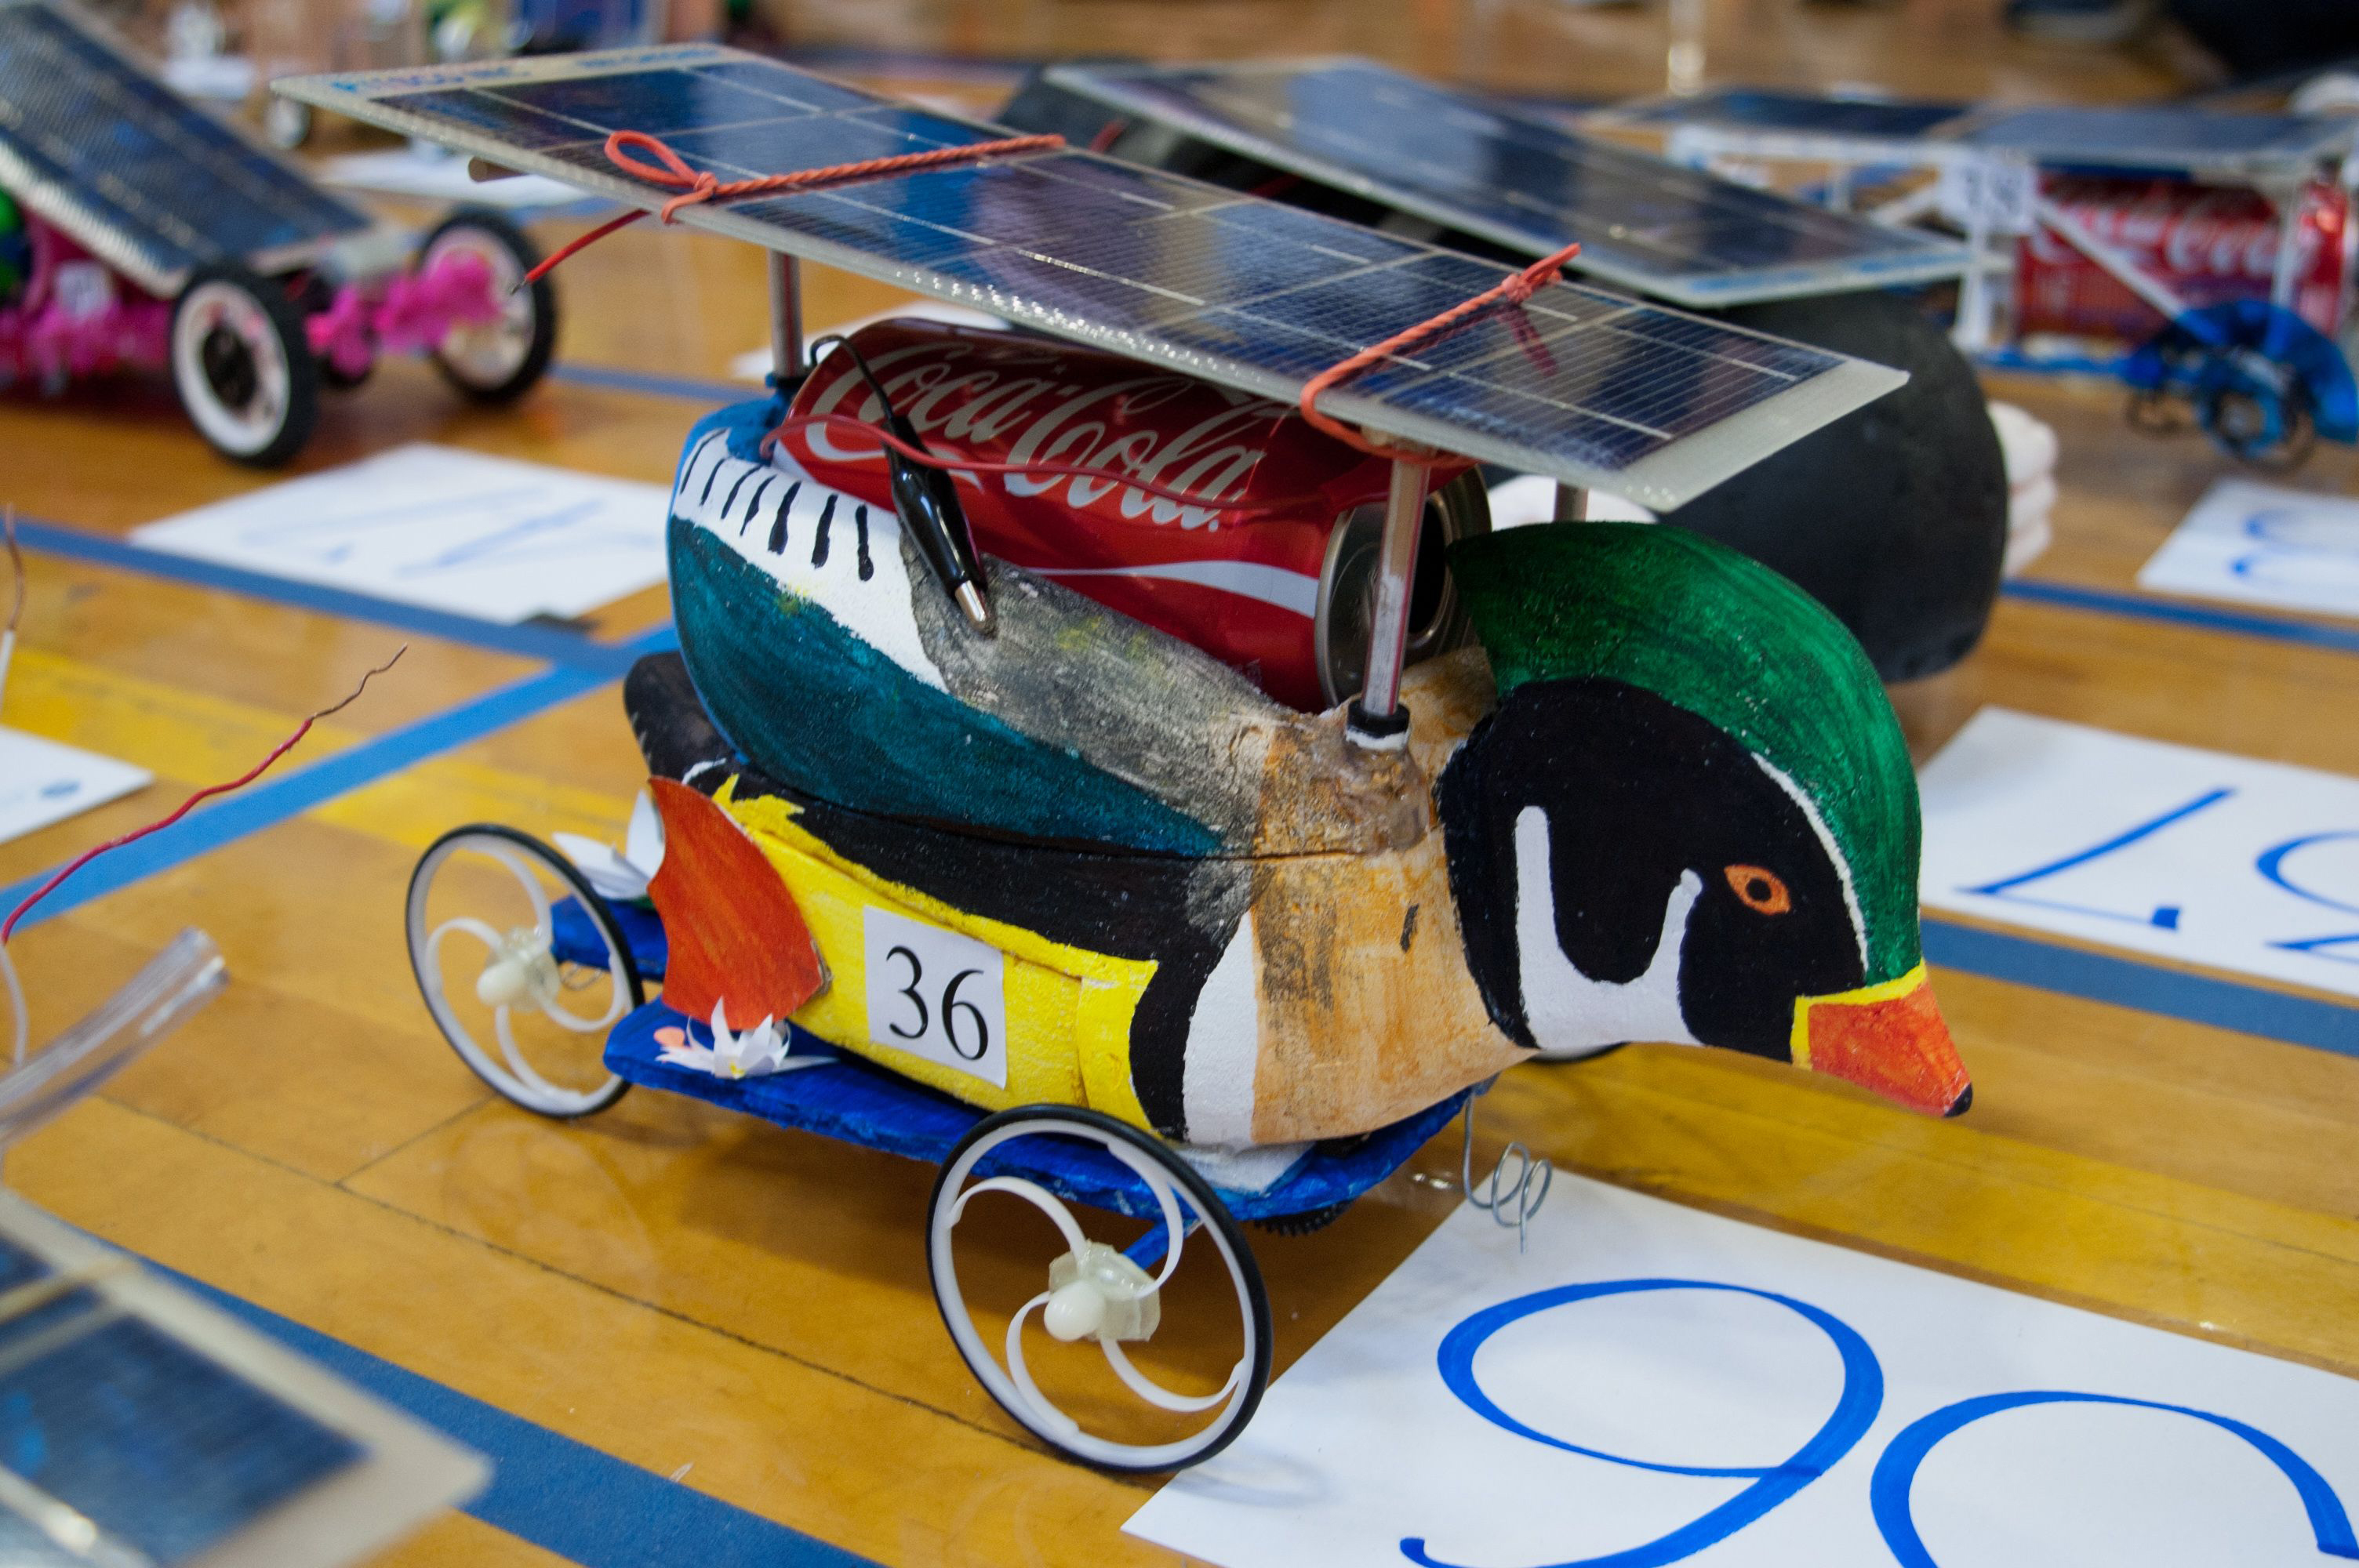 A solar car that was one winner in this year's Junior Solar Sprint competition.